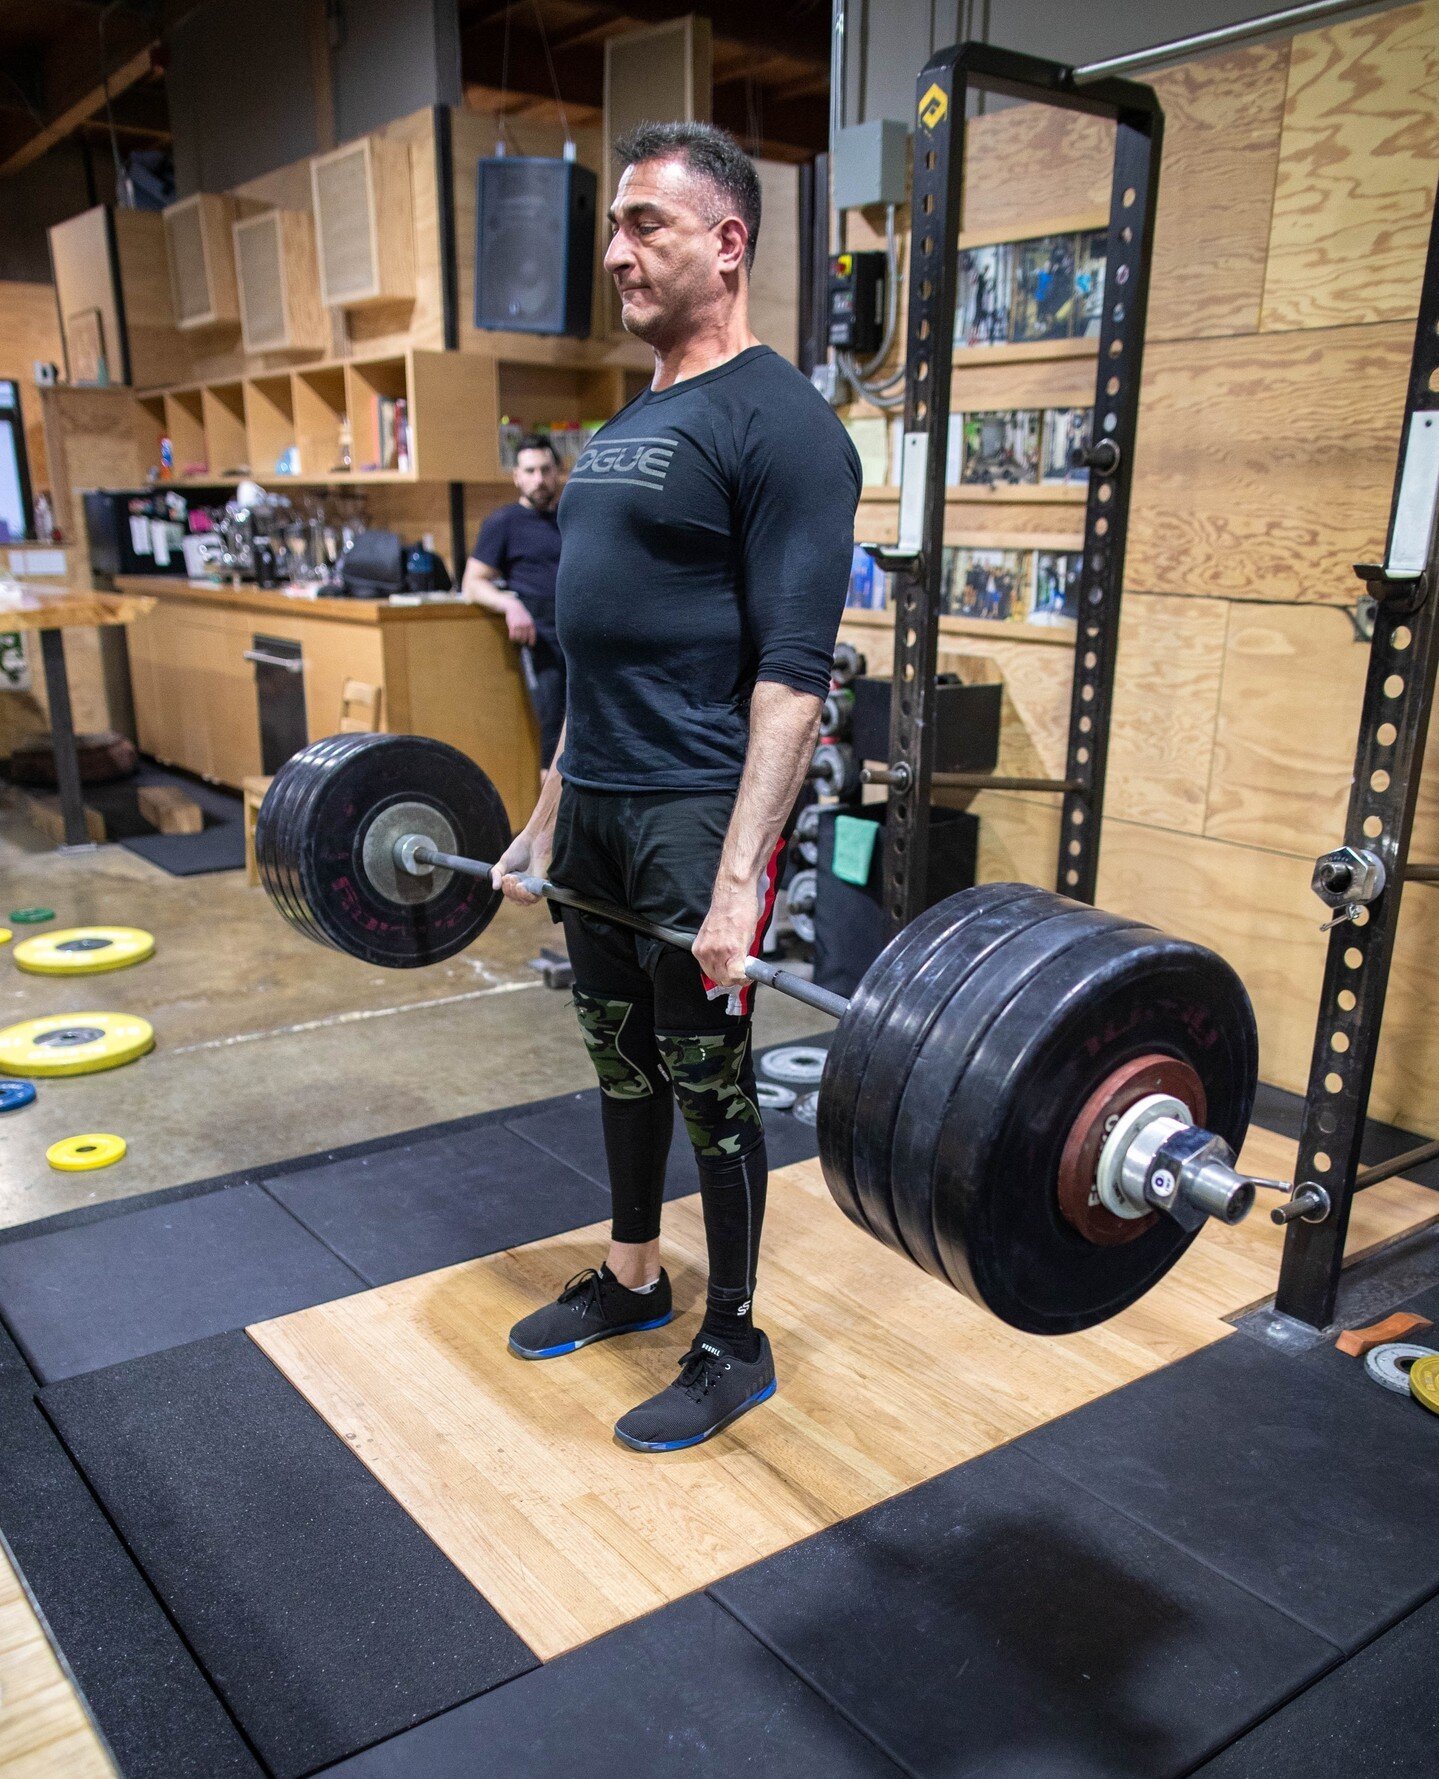 A buttery smooth 231 kilo (509 pound) deadlift PR for Atila. ⁠
⁠
We love this for him.